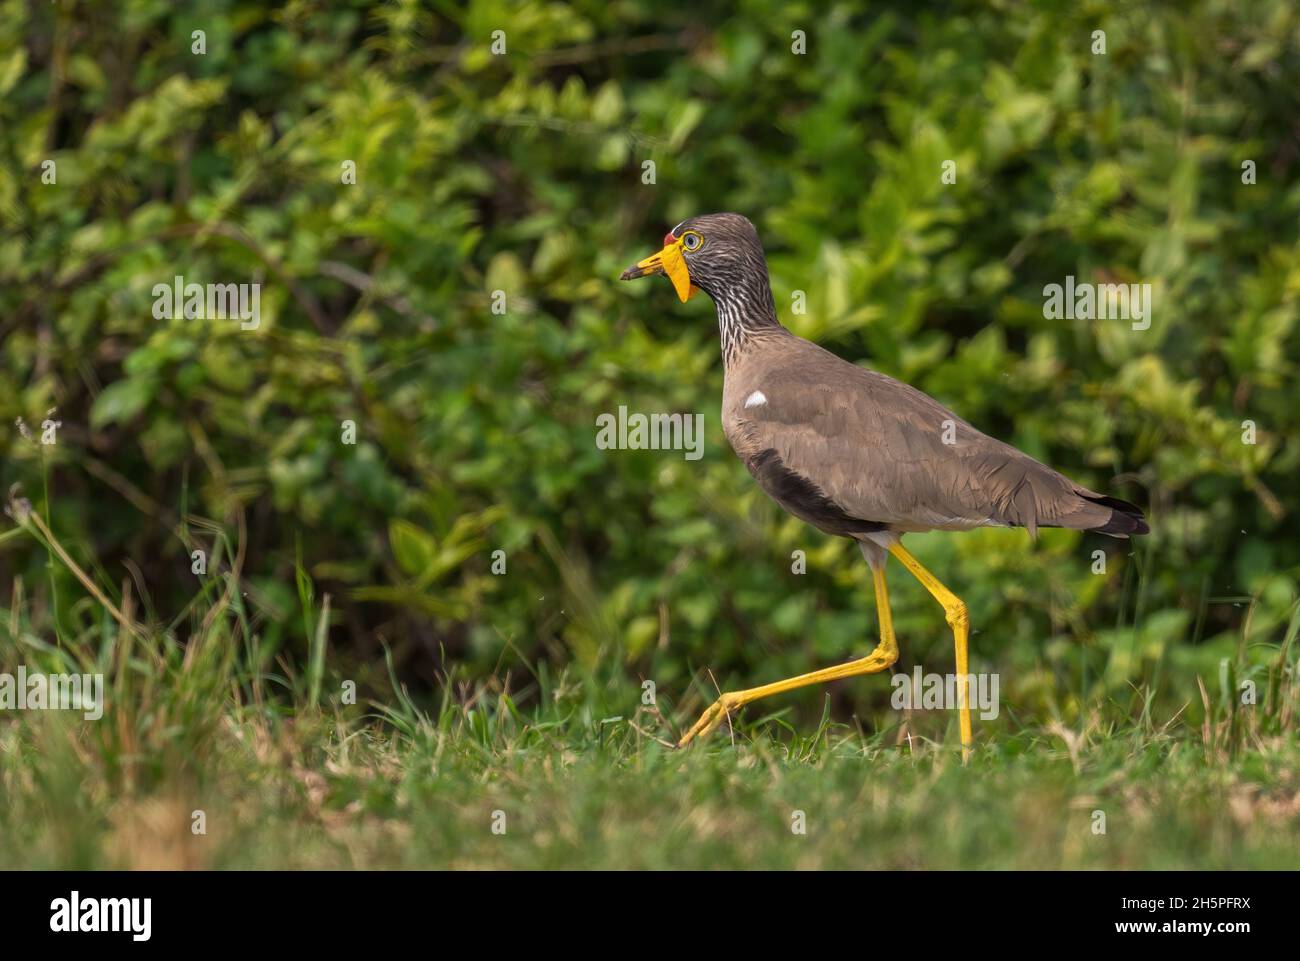 African Wattled Lapwing - Vanellus senegallus, beautiful special lapwing from African savannas and bushes, Queen Elizabeth National Park, Uganda. Stock Photo